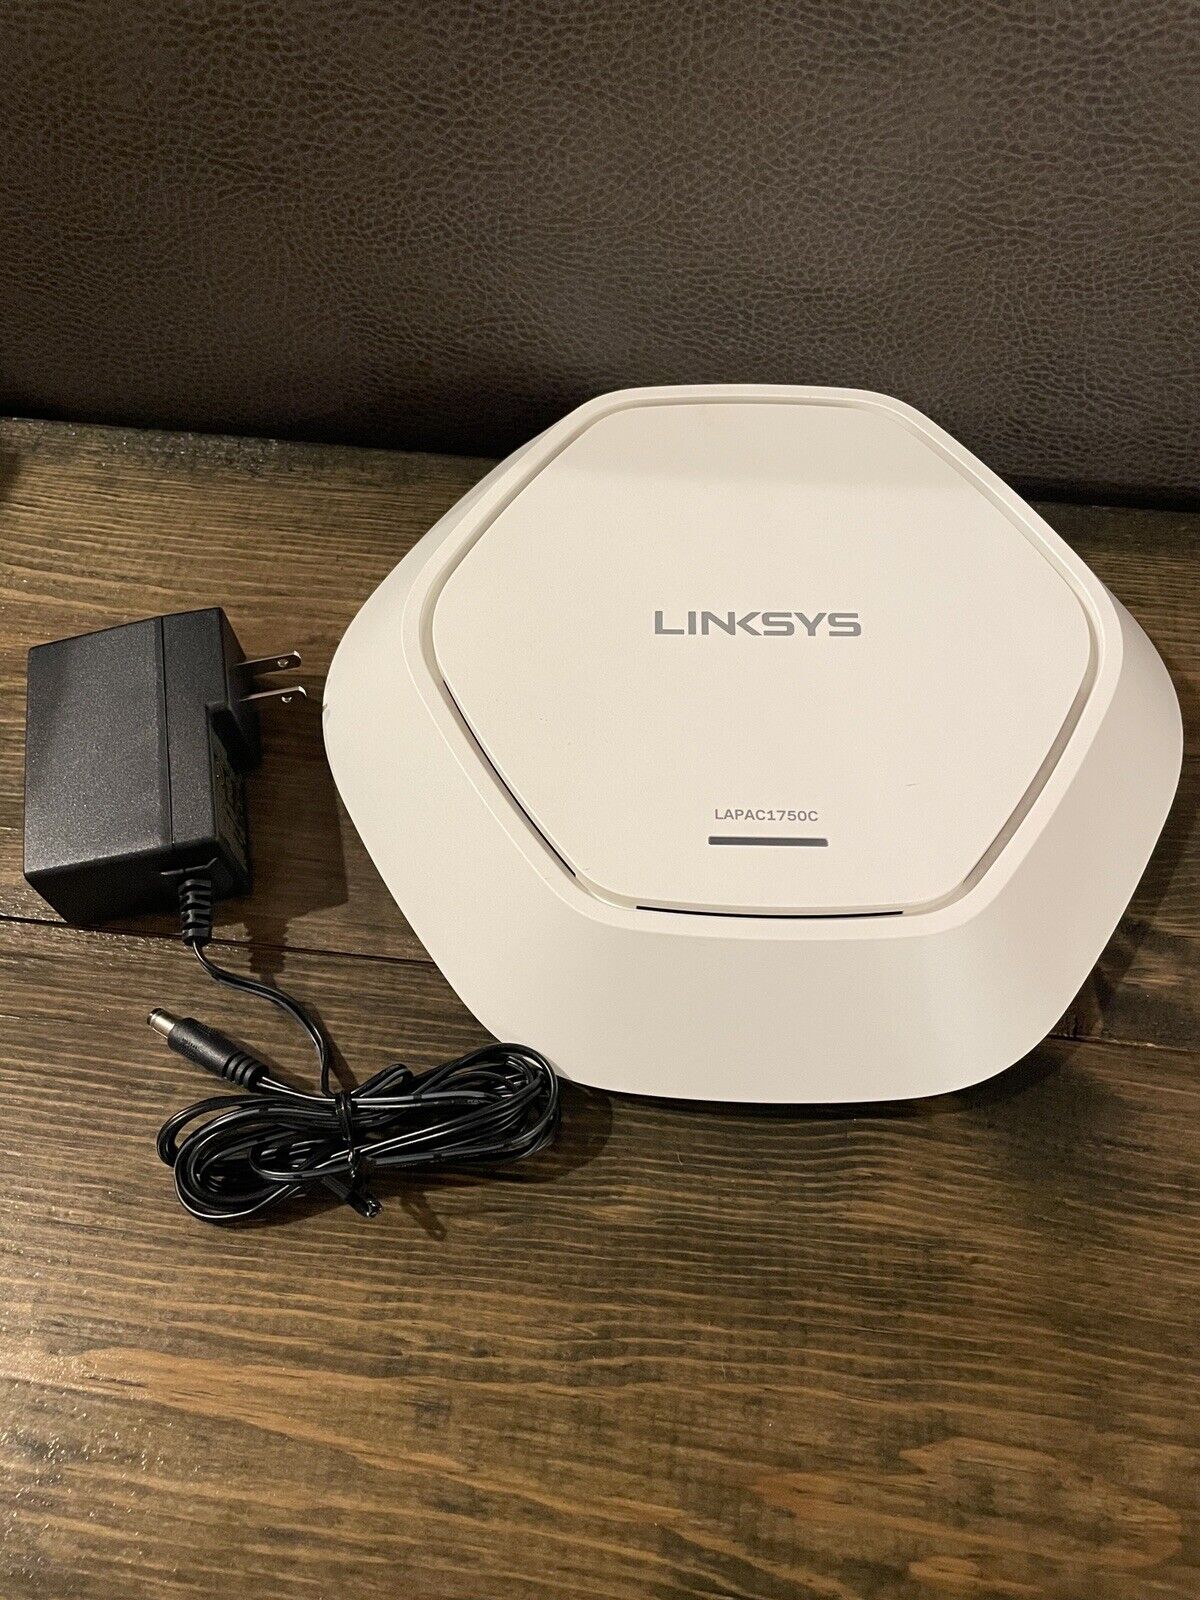 Linksys LAPAC1750C Dual-Band Business Cloud Access Point AC 1750 Mbps Wifi